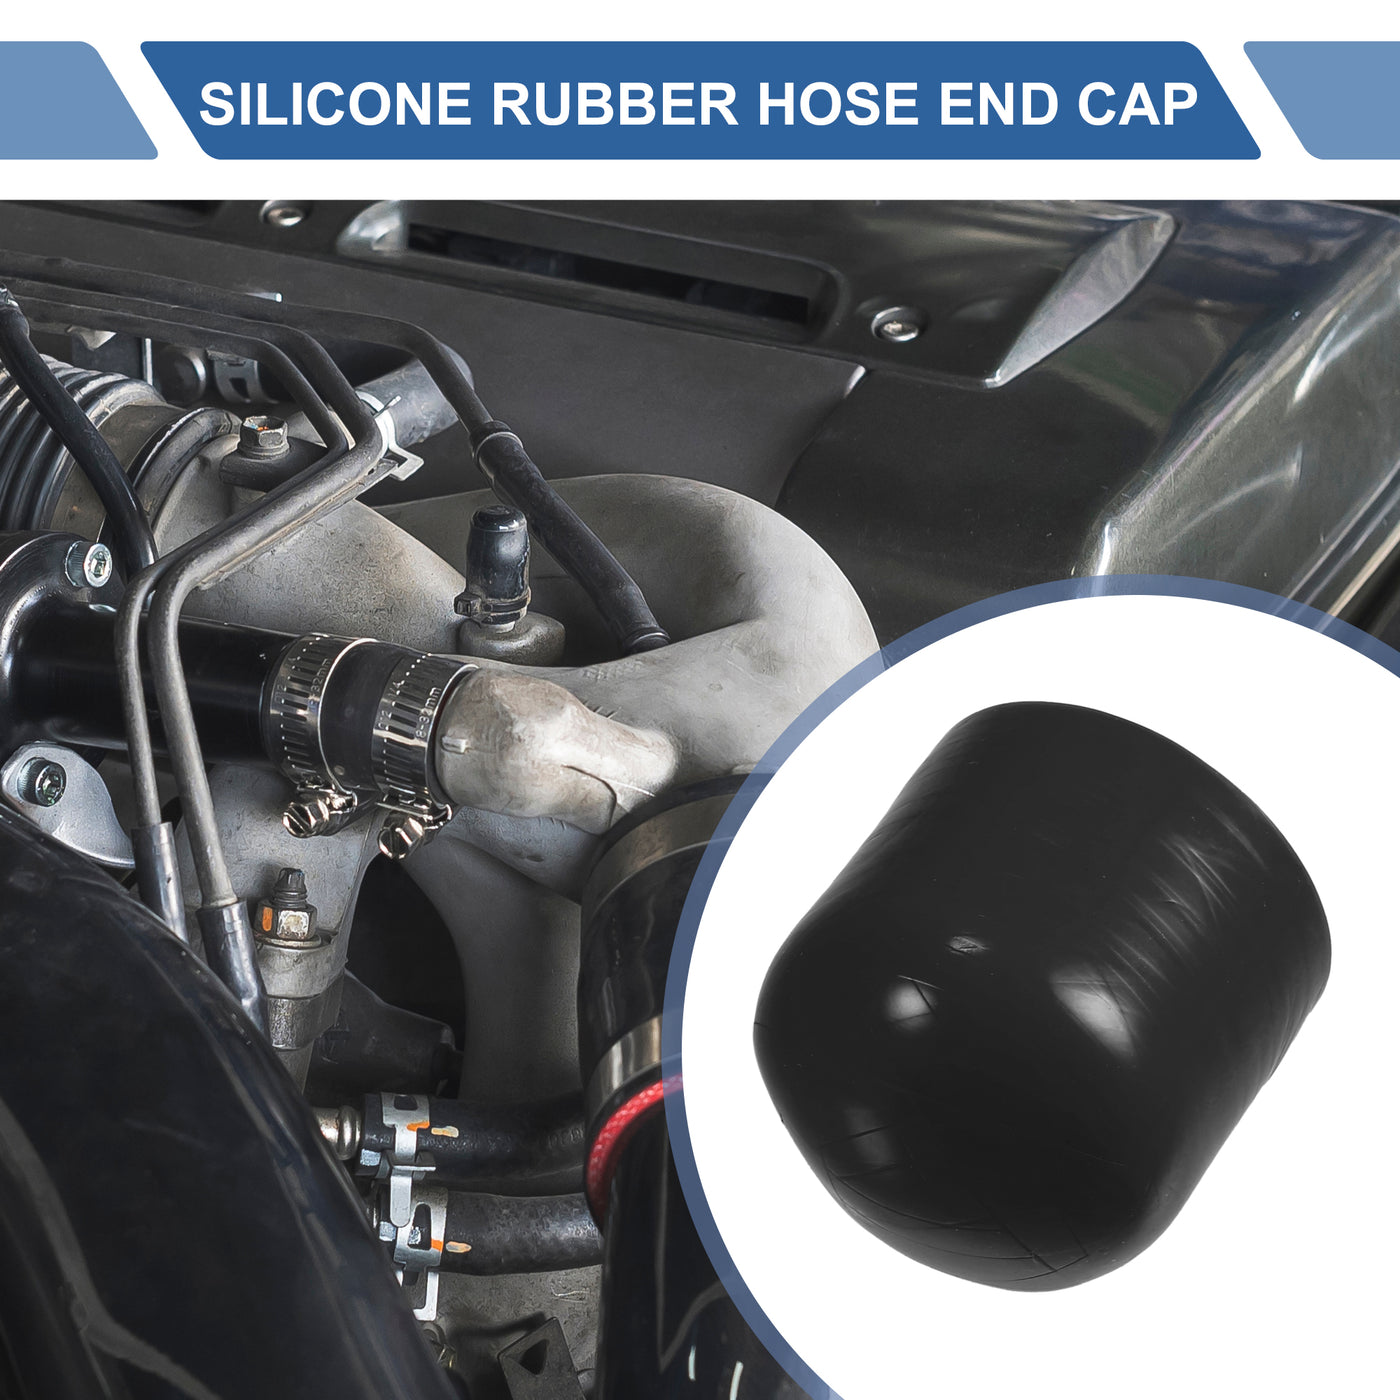 X AUTOHAUX 1 Set 30mm Length 38mm/1.50" ID Black Car Silicone Rubber Hose End Cap with Clamps Silicone Reinforced Blanking Cap for Bypass Tube Universal